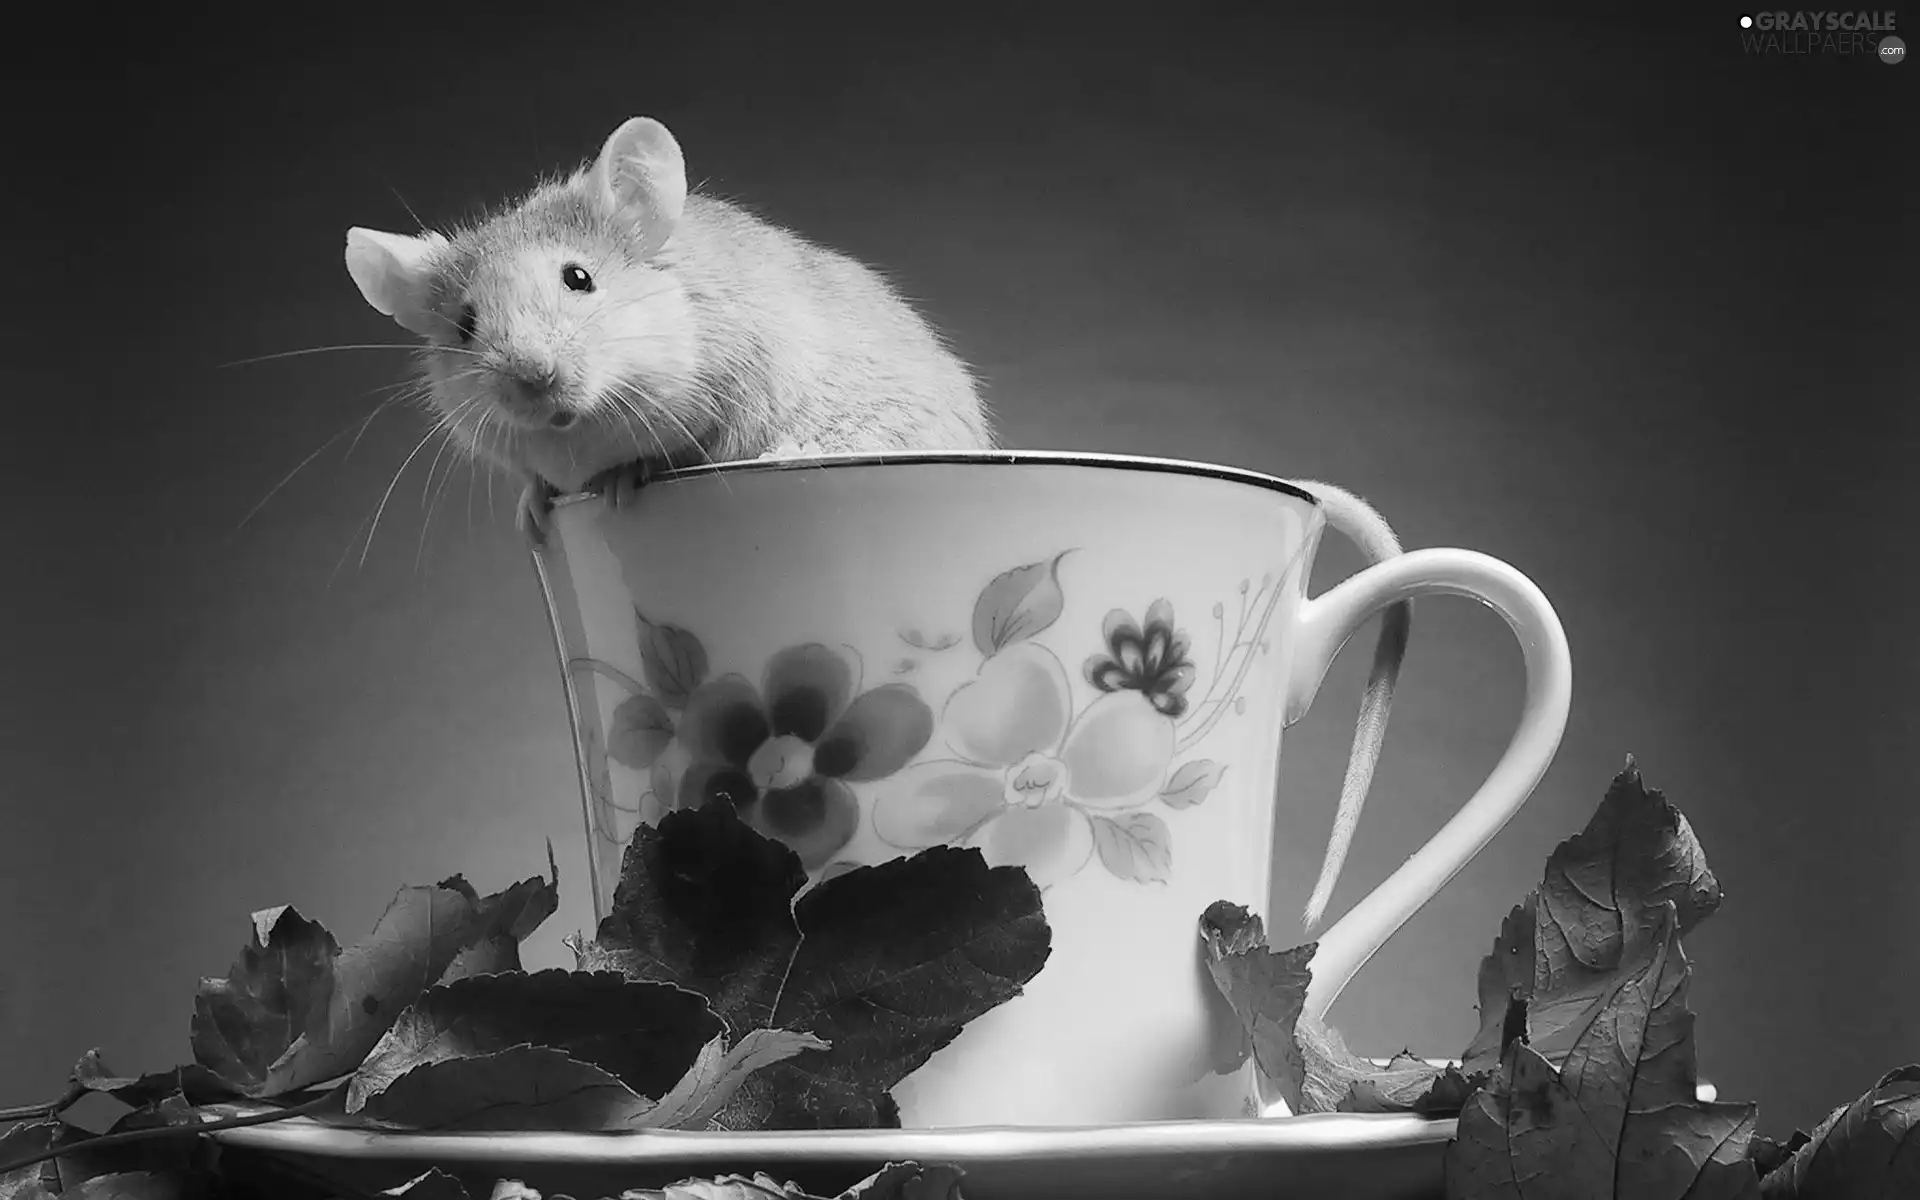 cup, hamster